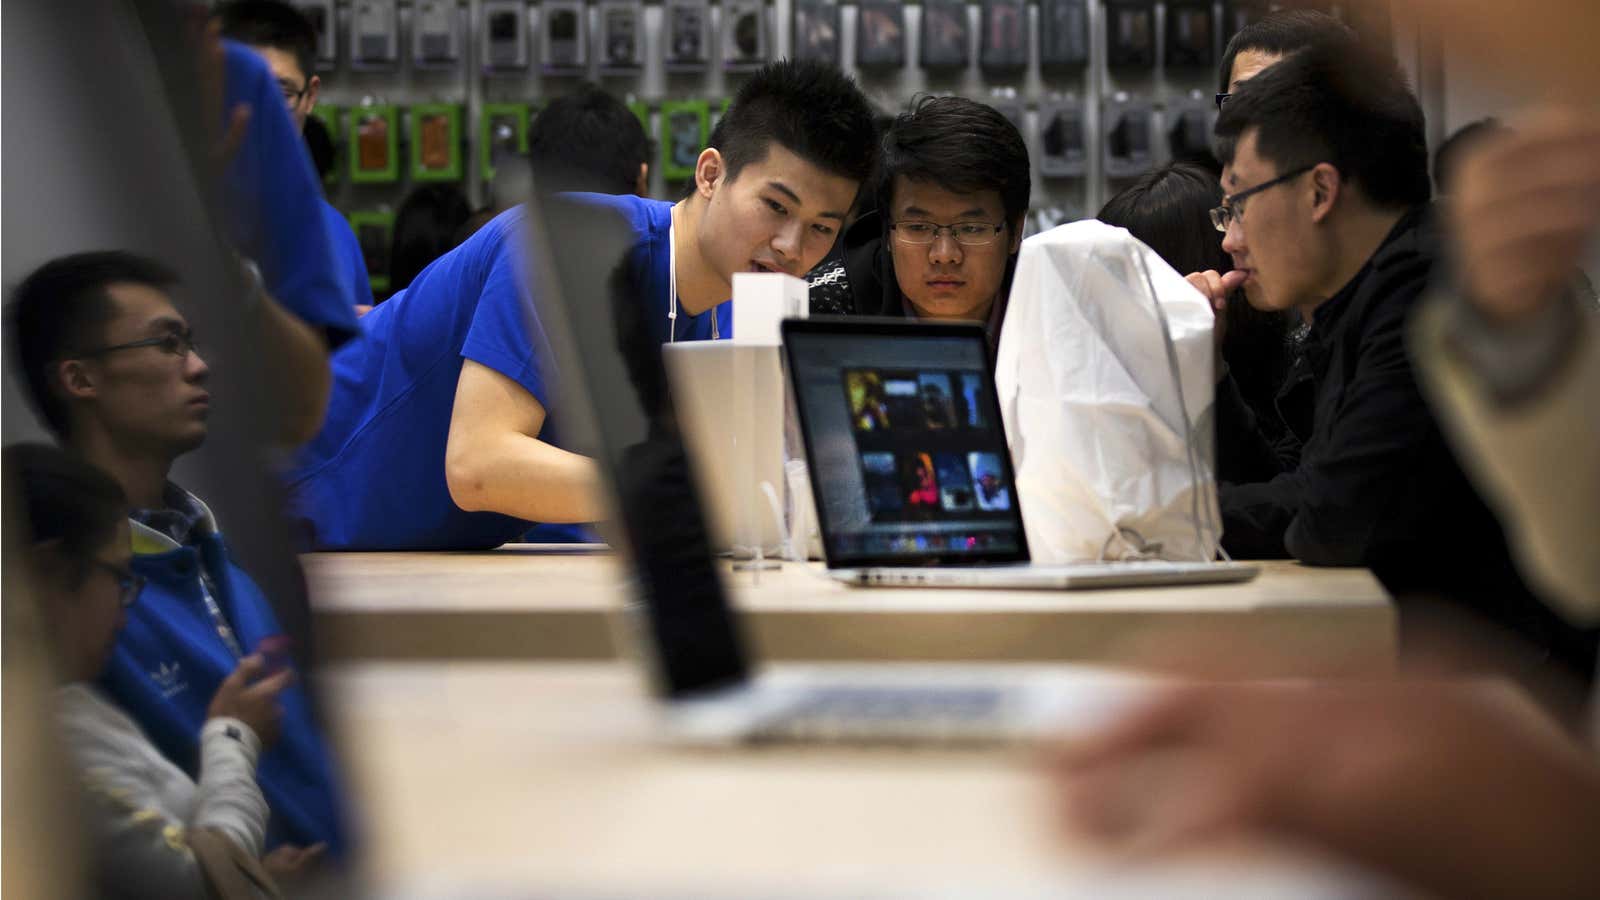 Apple’s fifth retail store in mainland China opened this month.